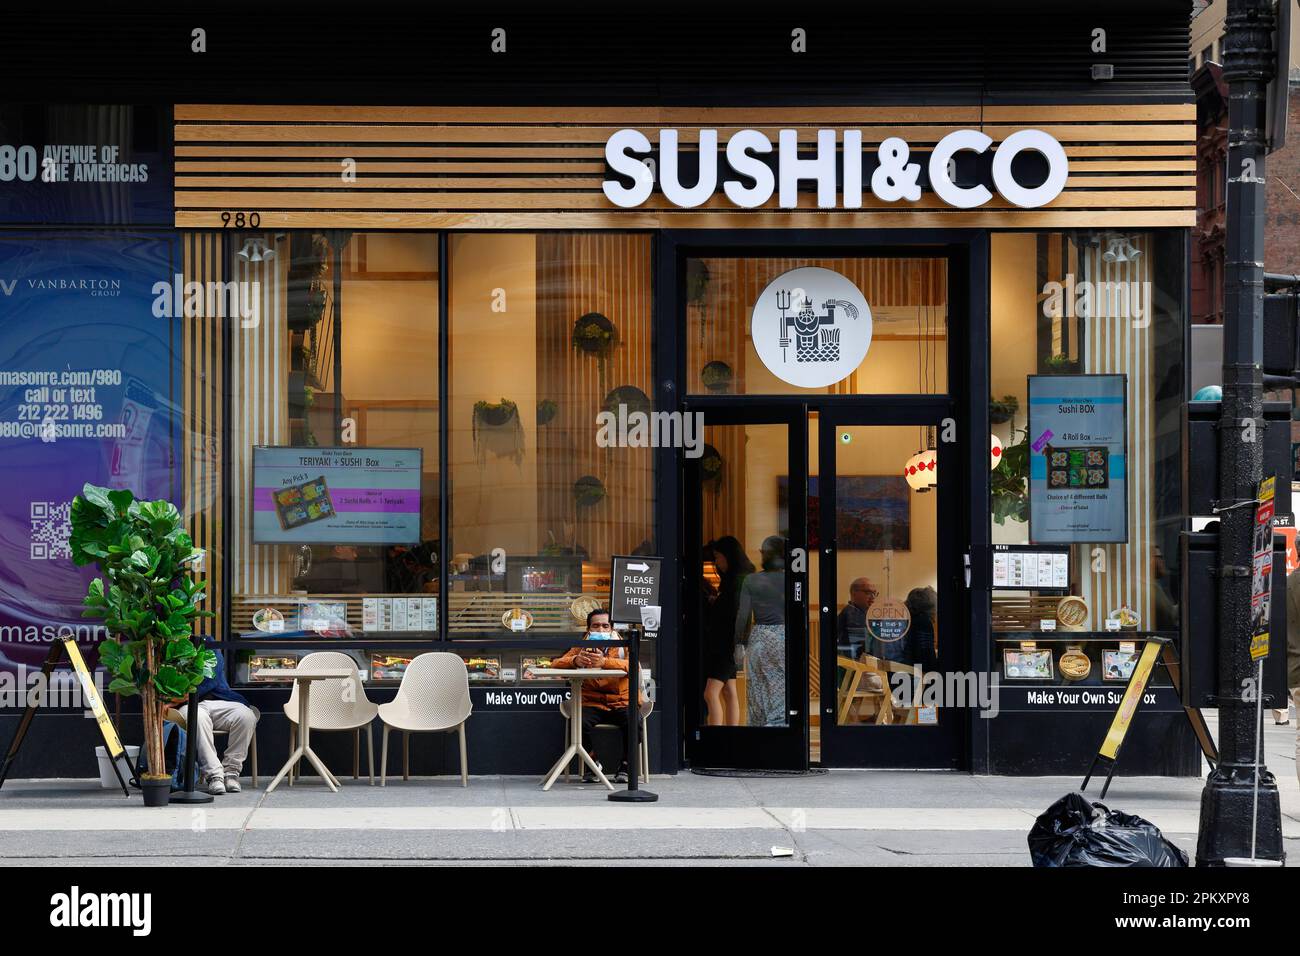 Sushi & Co, 980 6th Ave, New York, NYC storefront photo of a sushi fast casual Japanese restaurant in Midtown Manhattan. Stock Photo